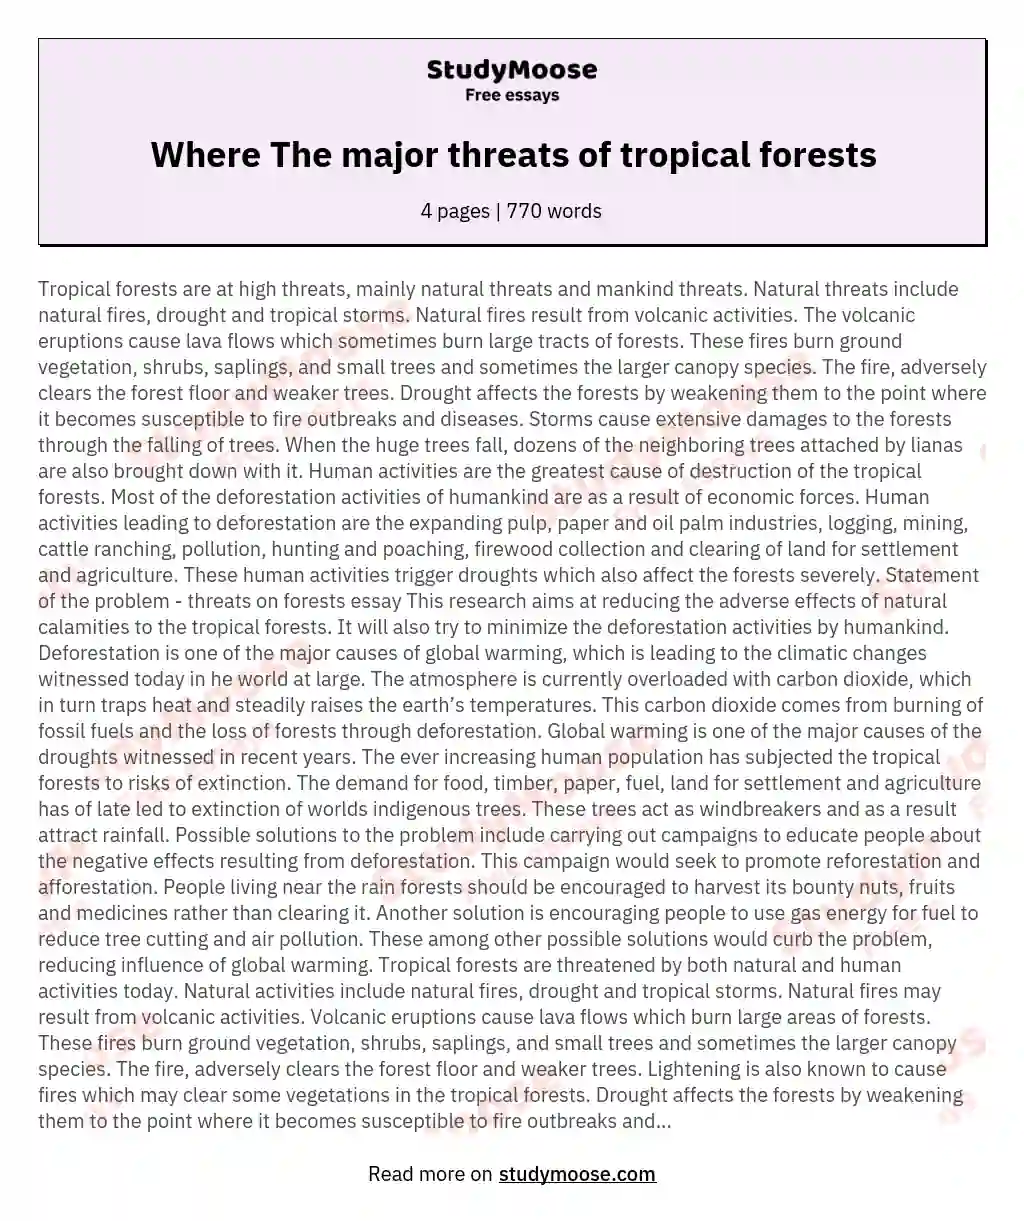 Where The major threats of tropical forests